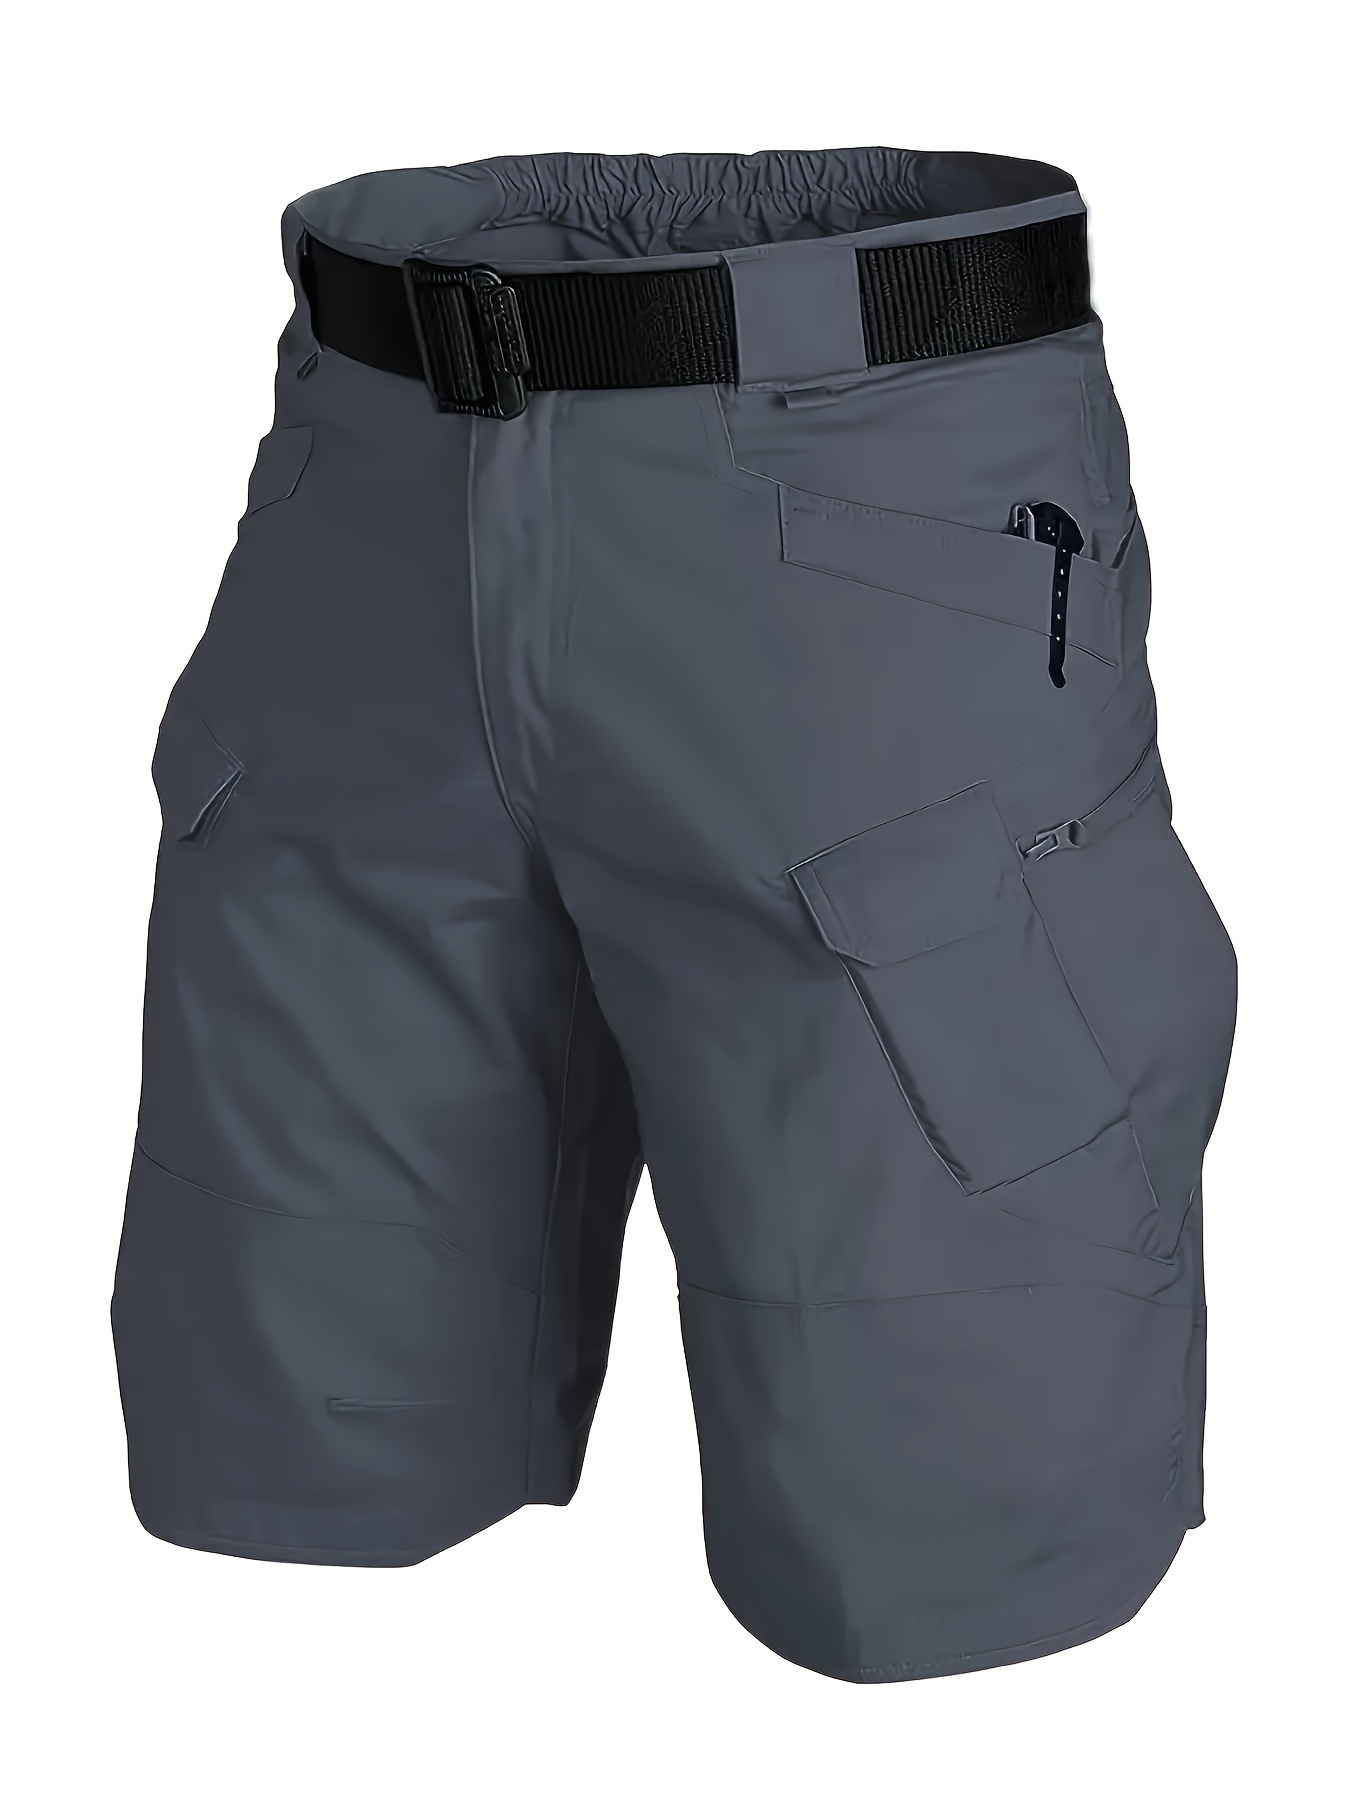 Mens Outdoor Tactical Cargo Short Quick Dry Sports Multi Pockets